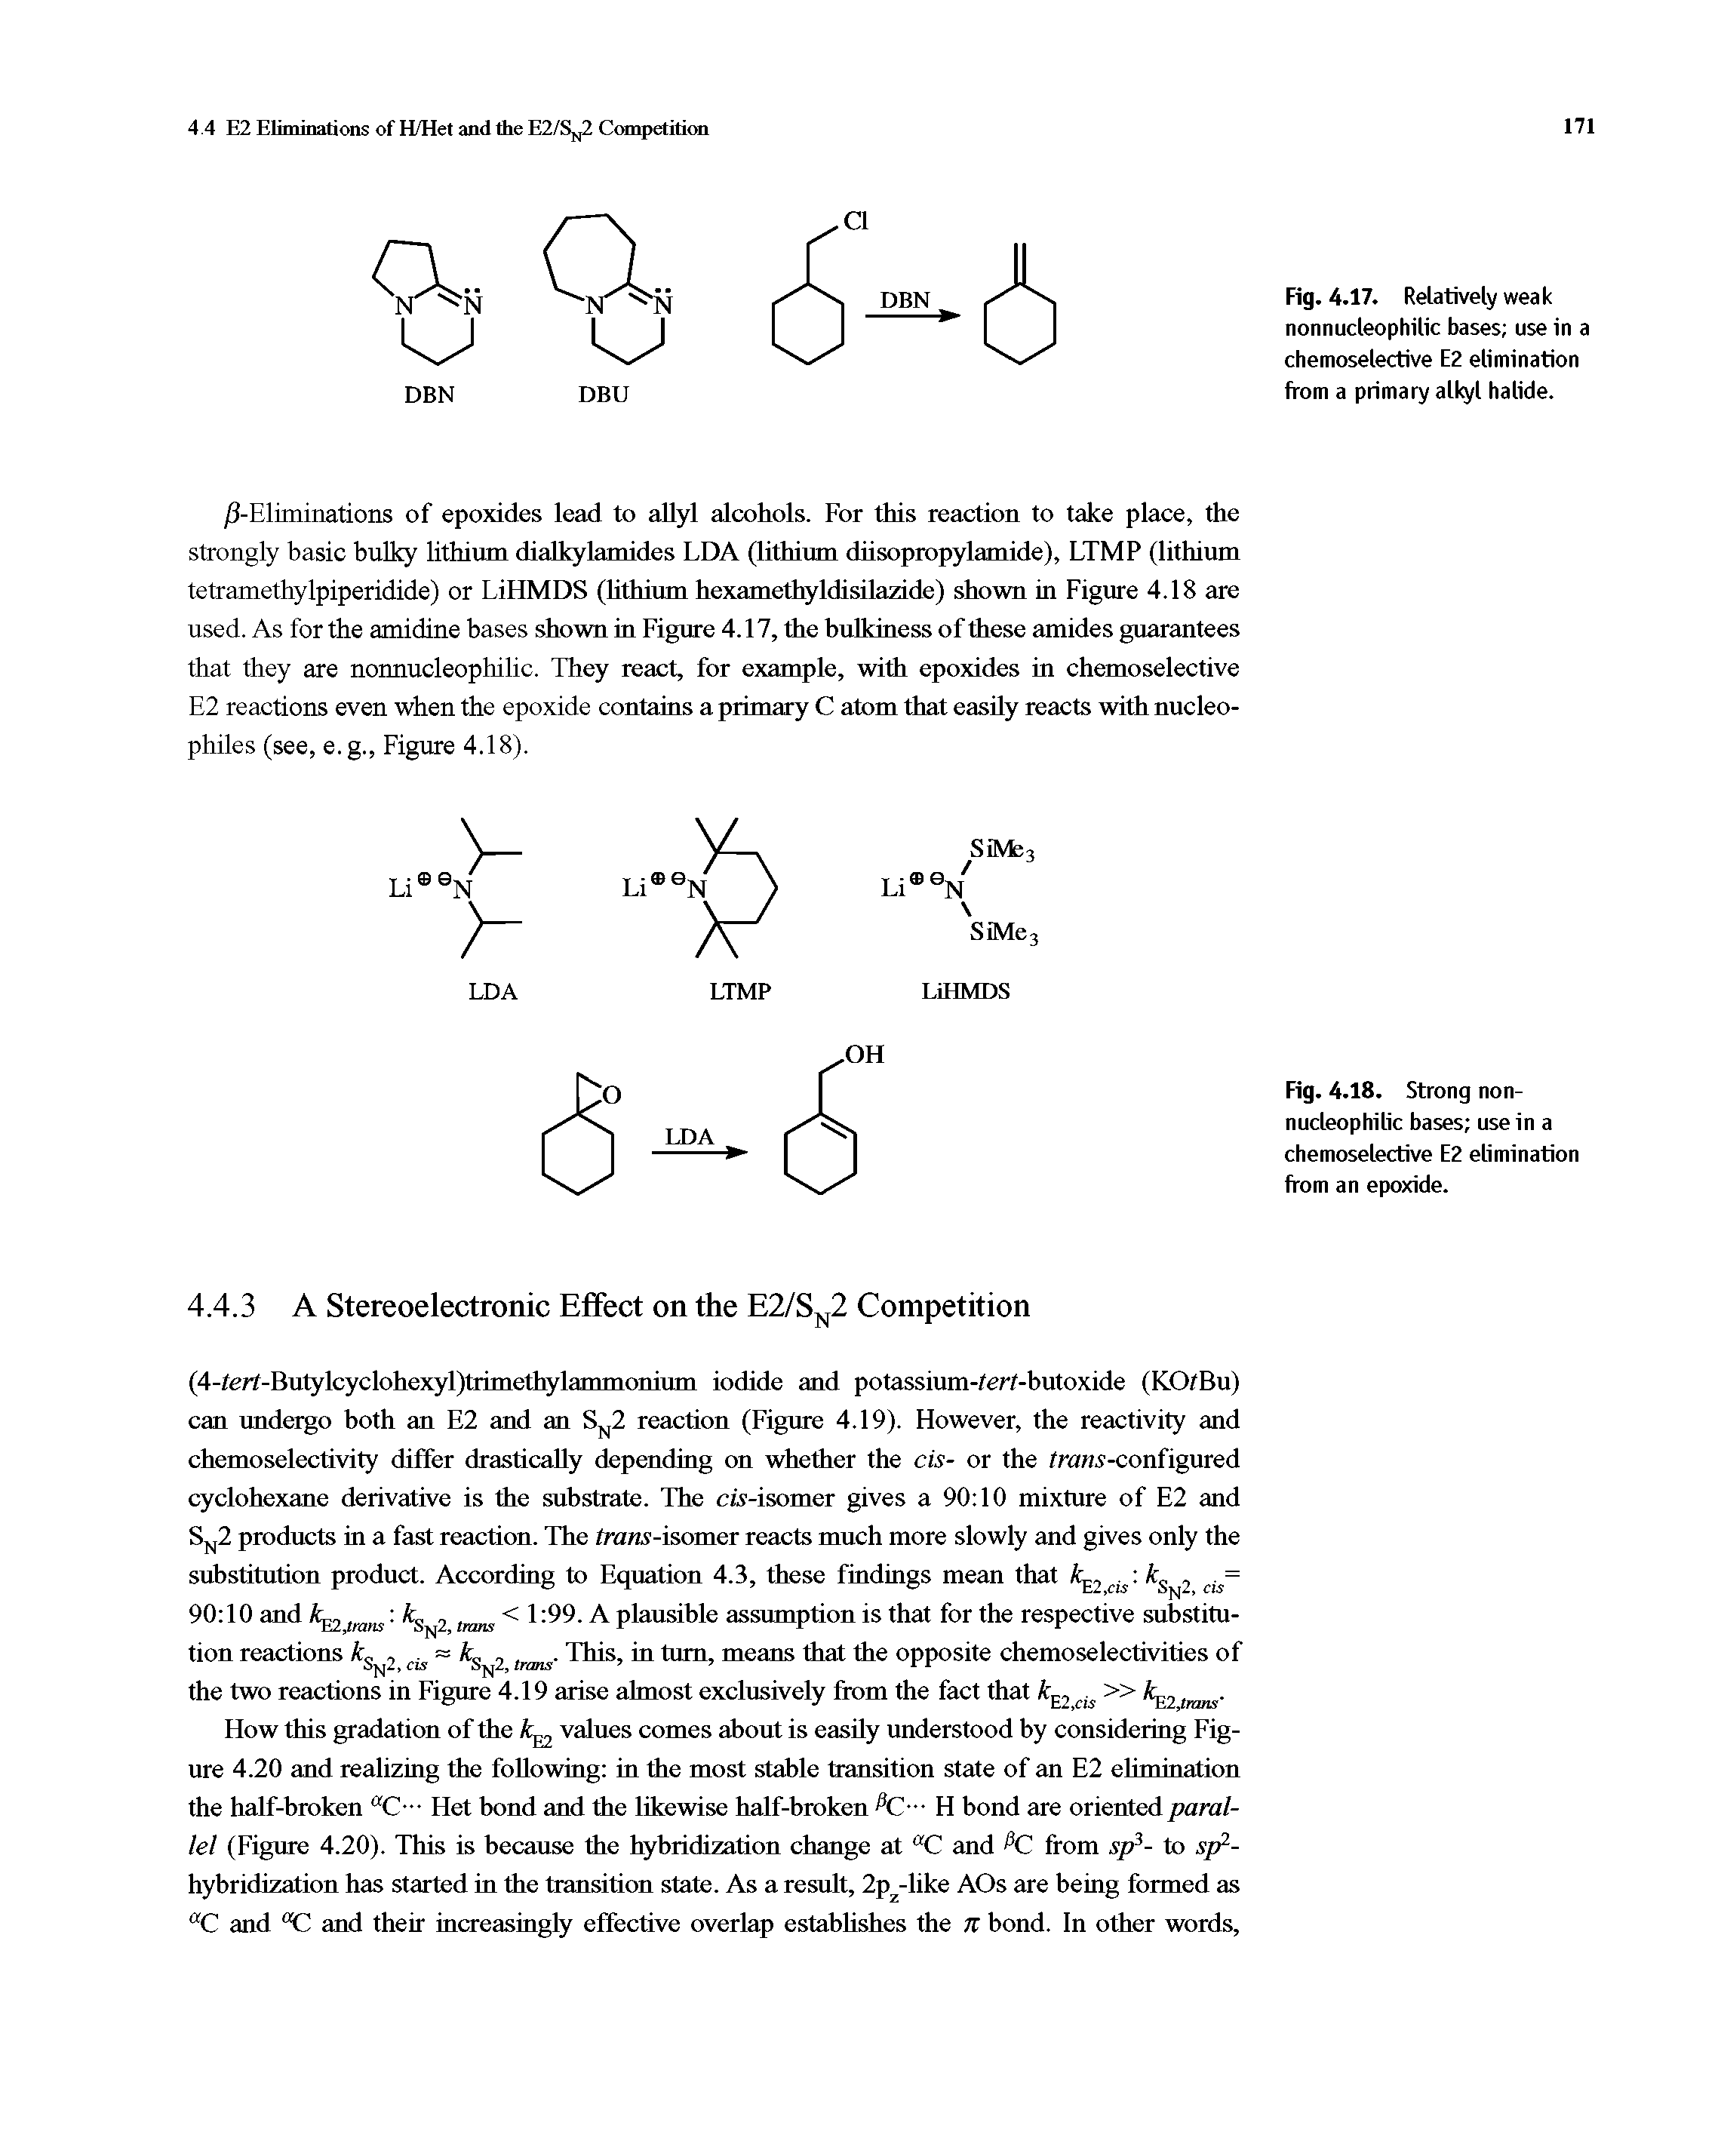 Fig. 4.17. Relatively weak nonnucleophilic bases use in a chemoselective E2 elimination from a primary altyl halide.